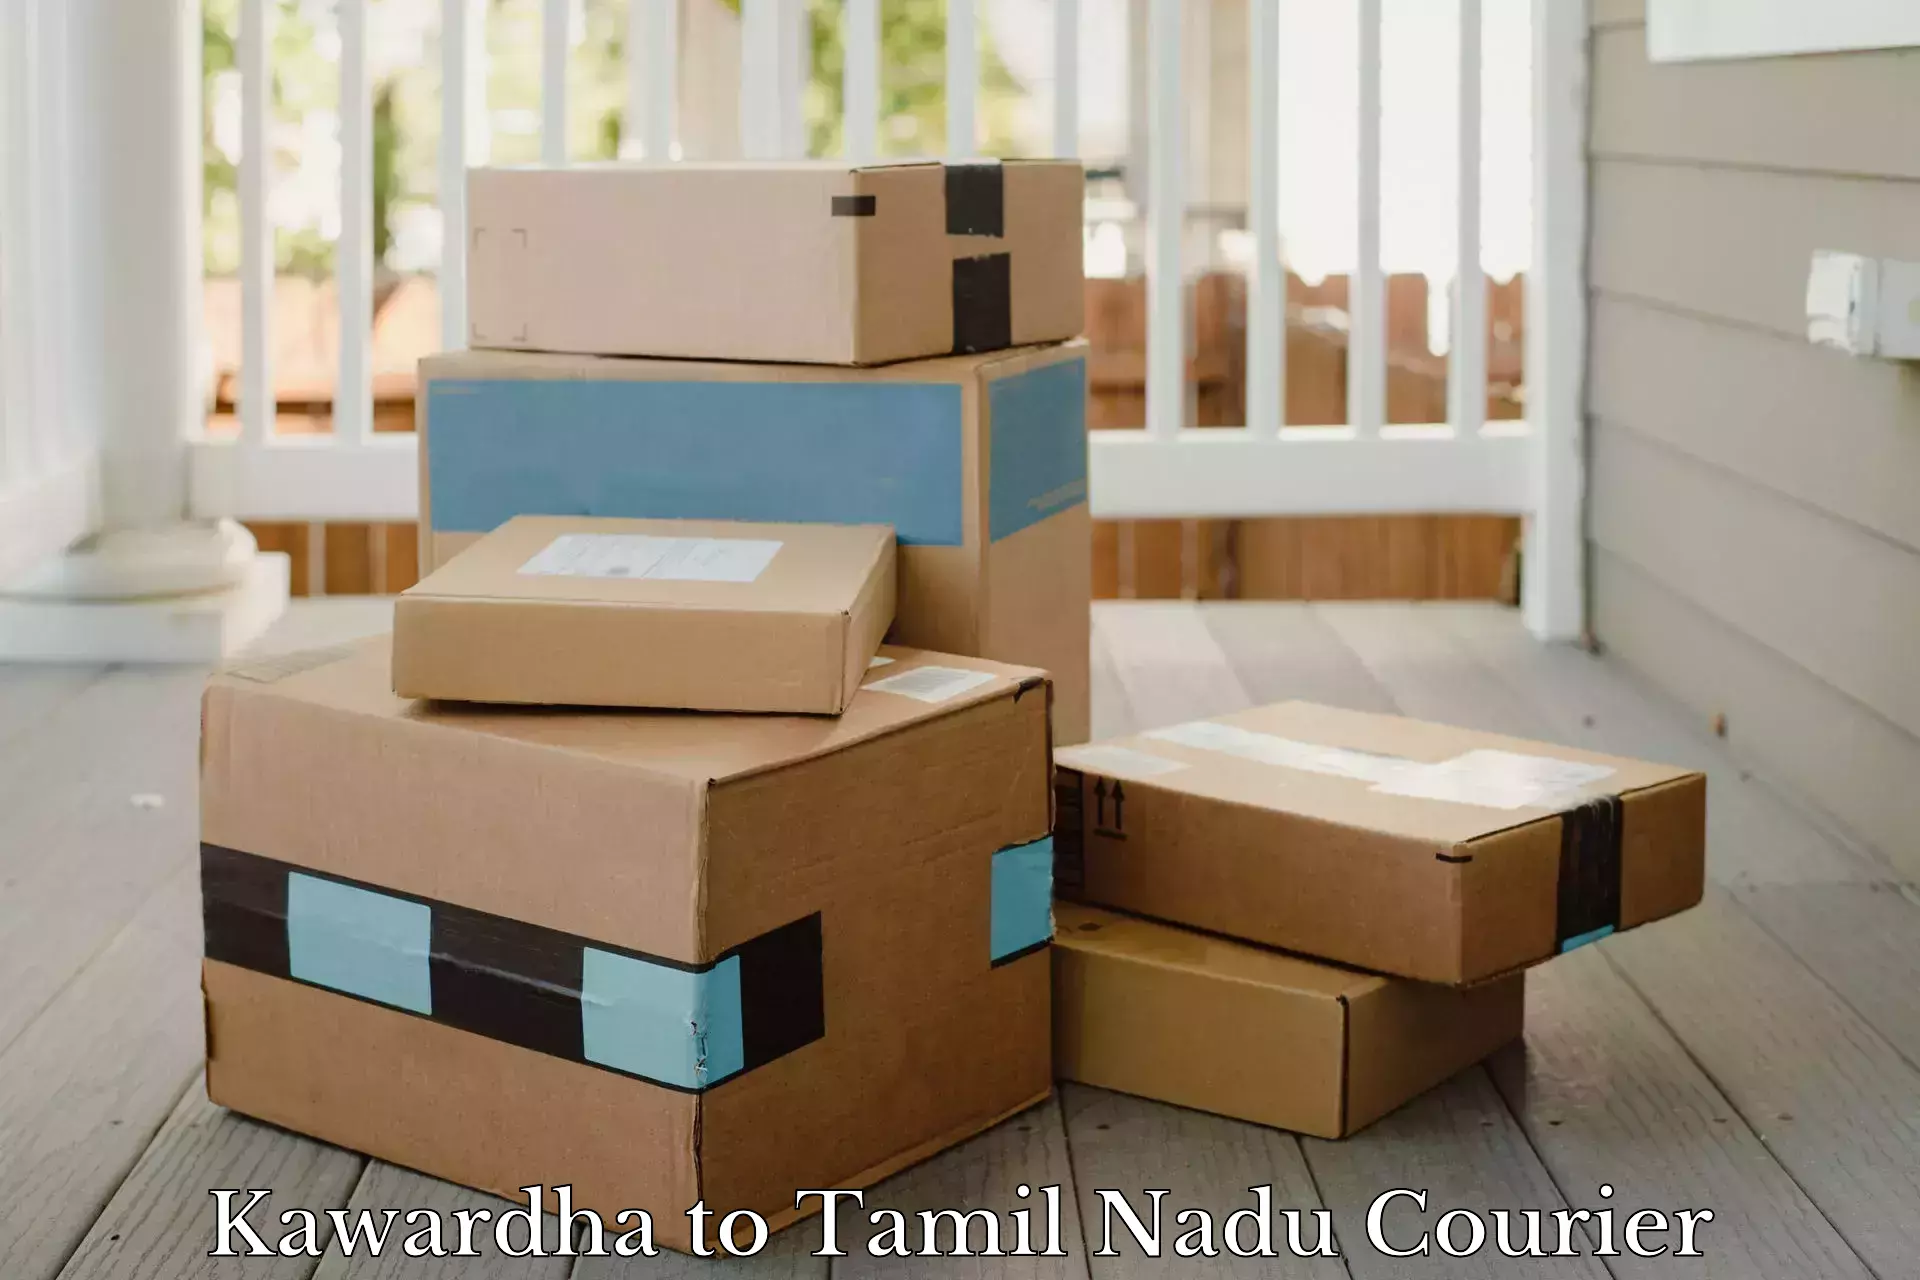 Flexible delivery schedules in Kawardha to Tamil Nadu